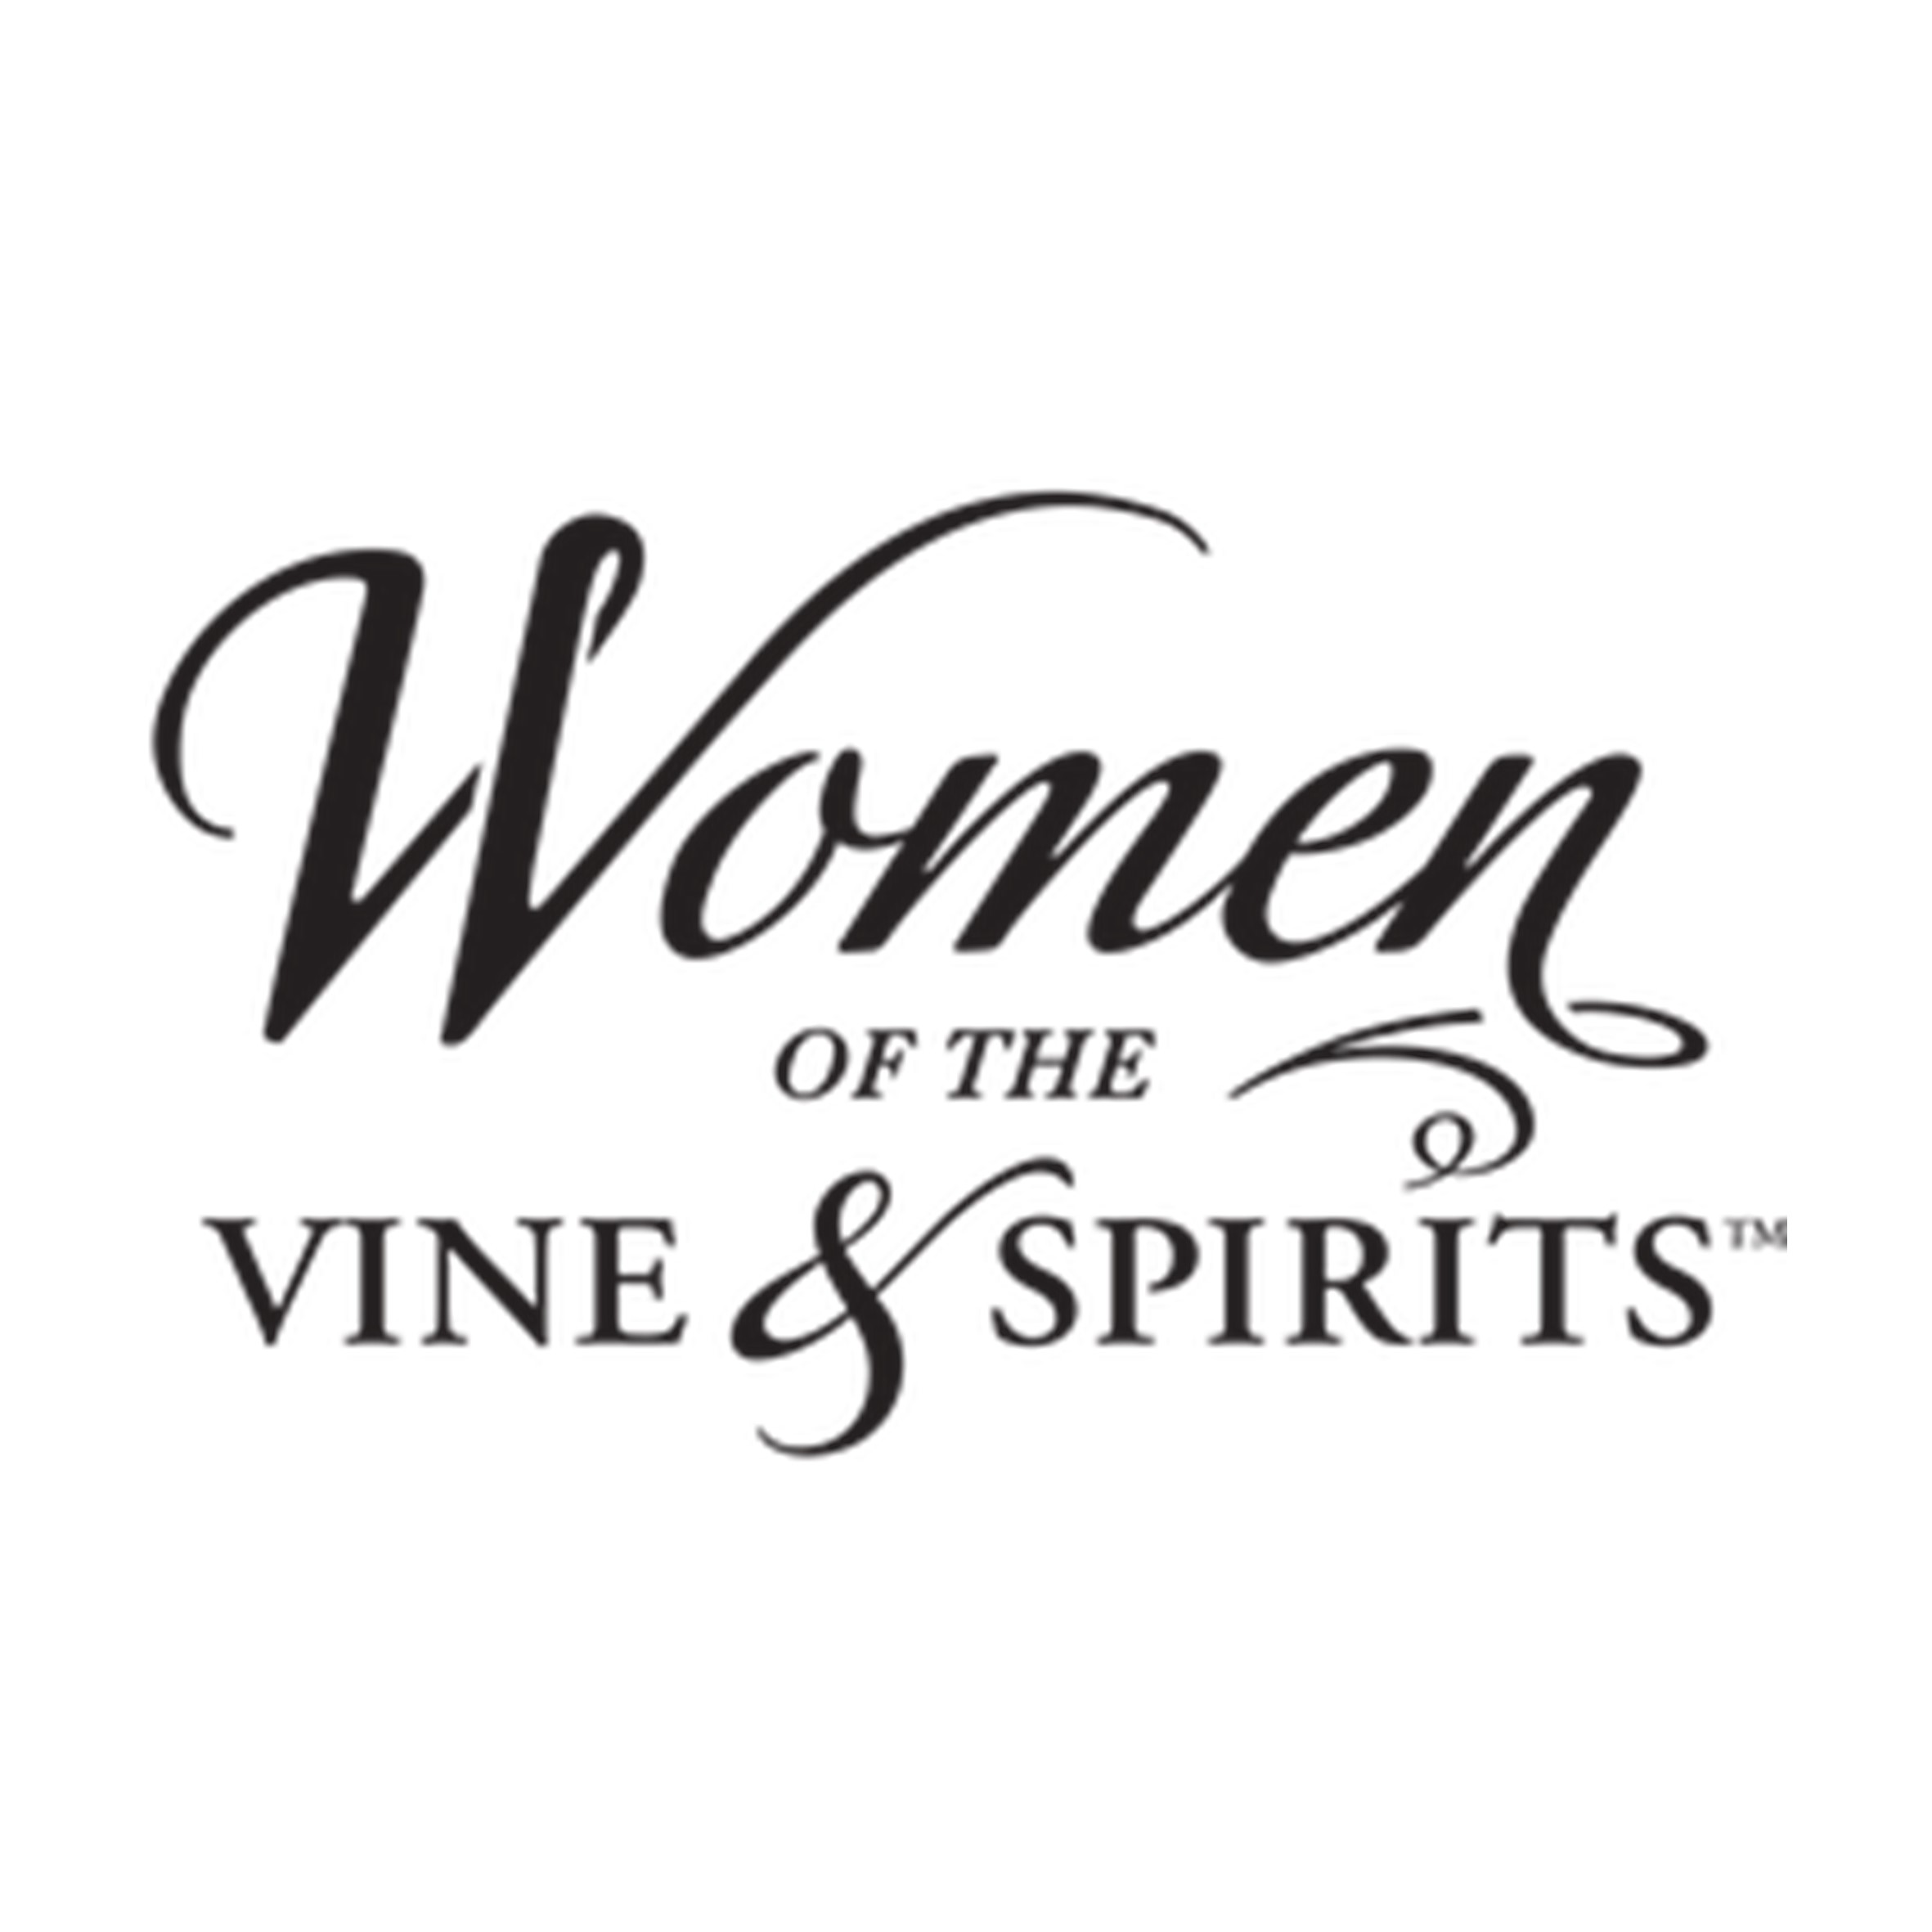 Women of the Vine logo - Press release: Wines offering a sustainability and environmental connection have the best chance of success within the alternative wine category